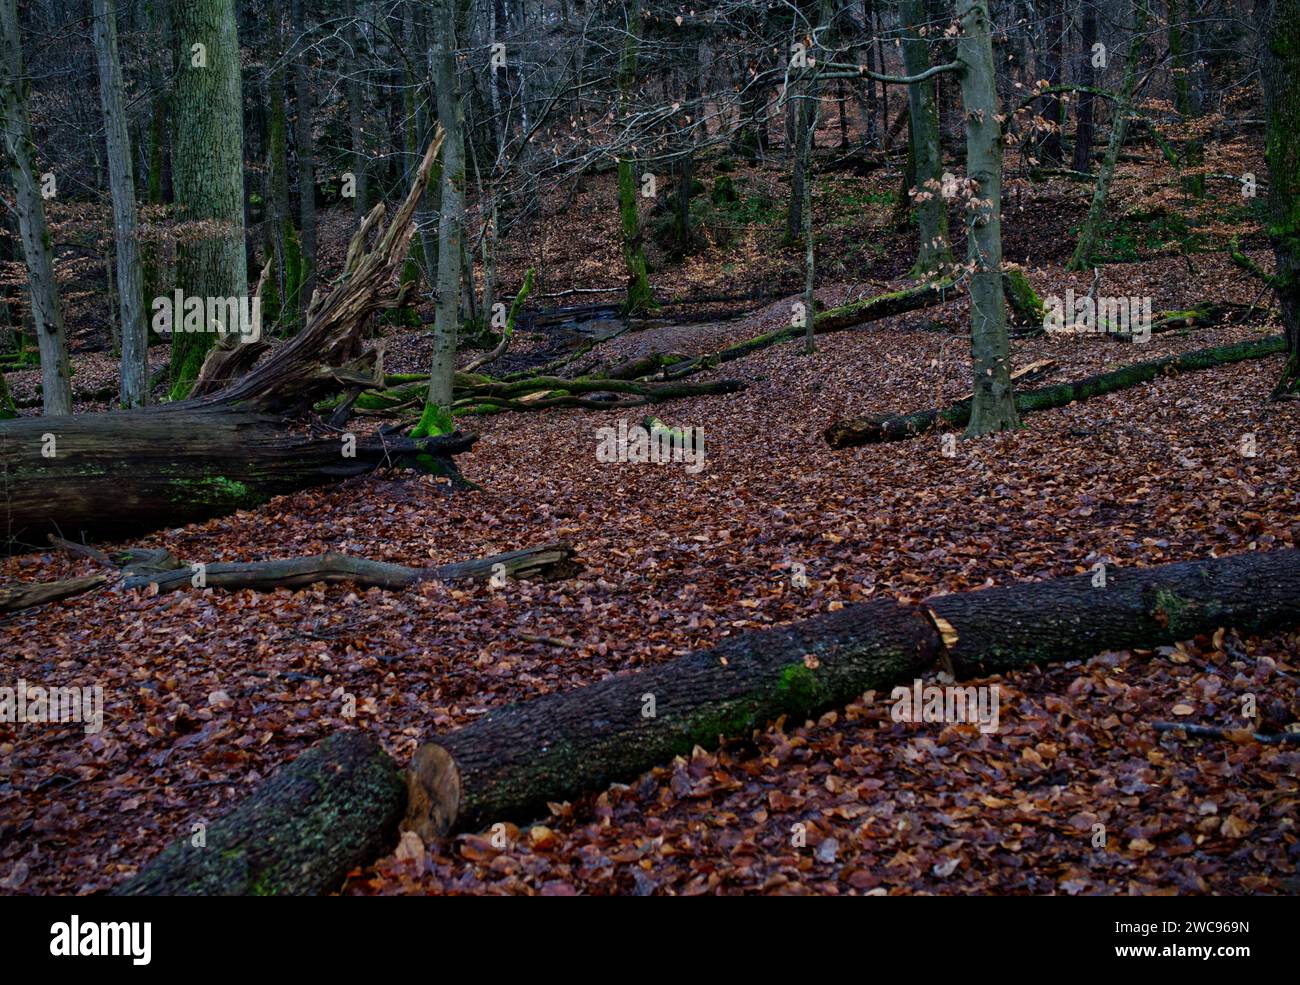 Forest scenery with a path downhill to a creek. Horizontally lying tree trunks in the foreground and brown foliage everywhere on the ground Stock Photo